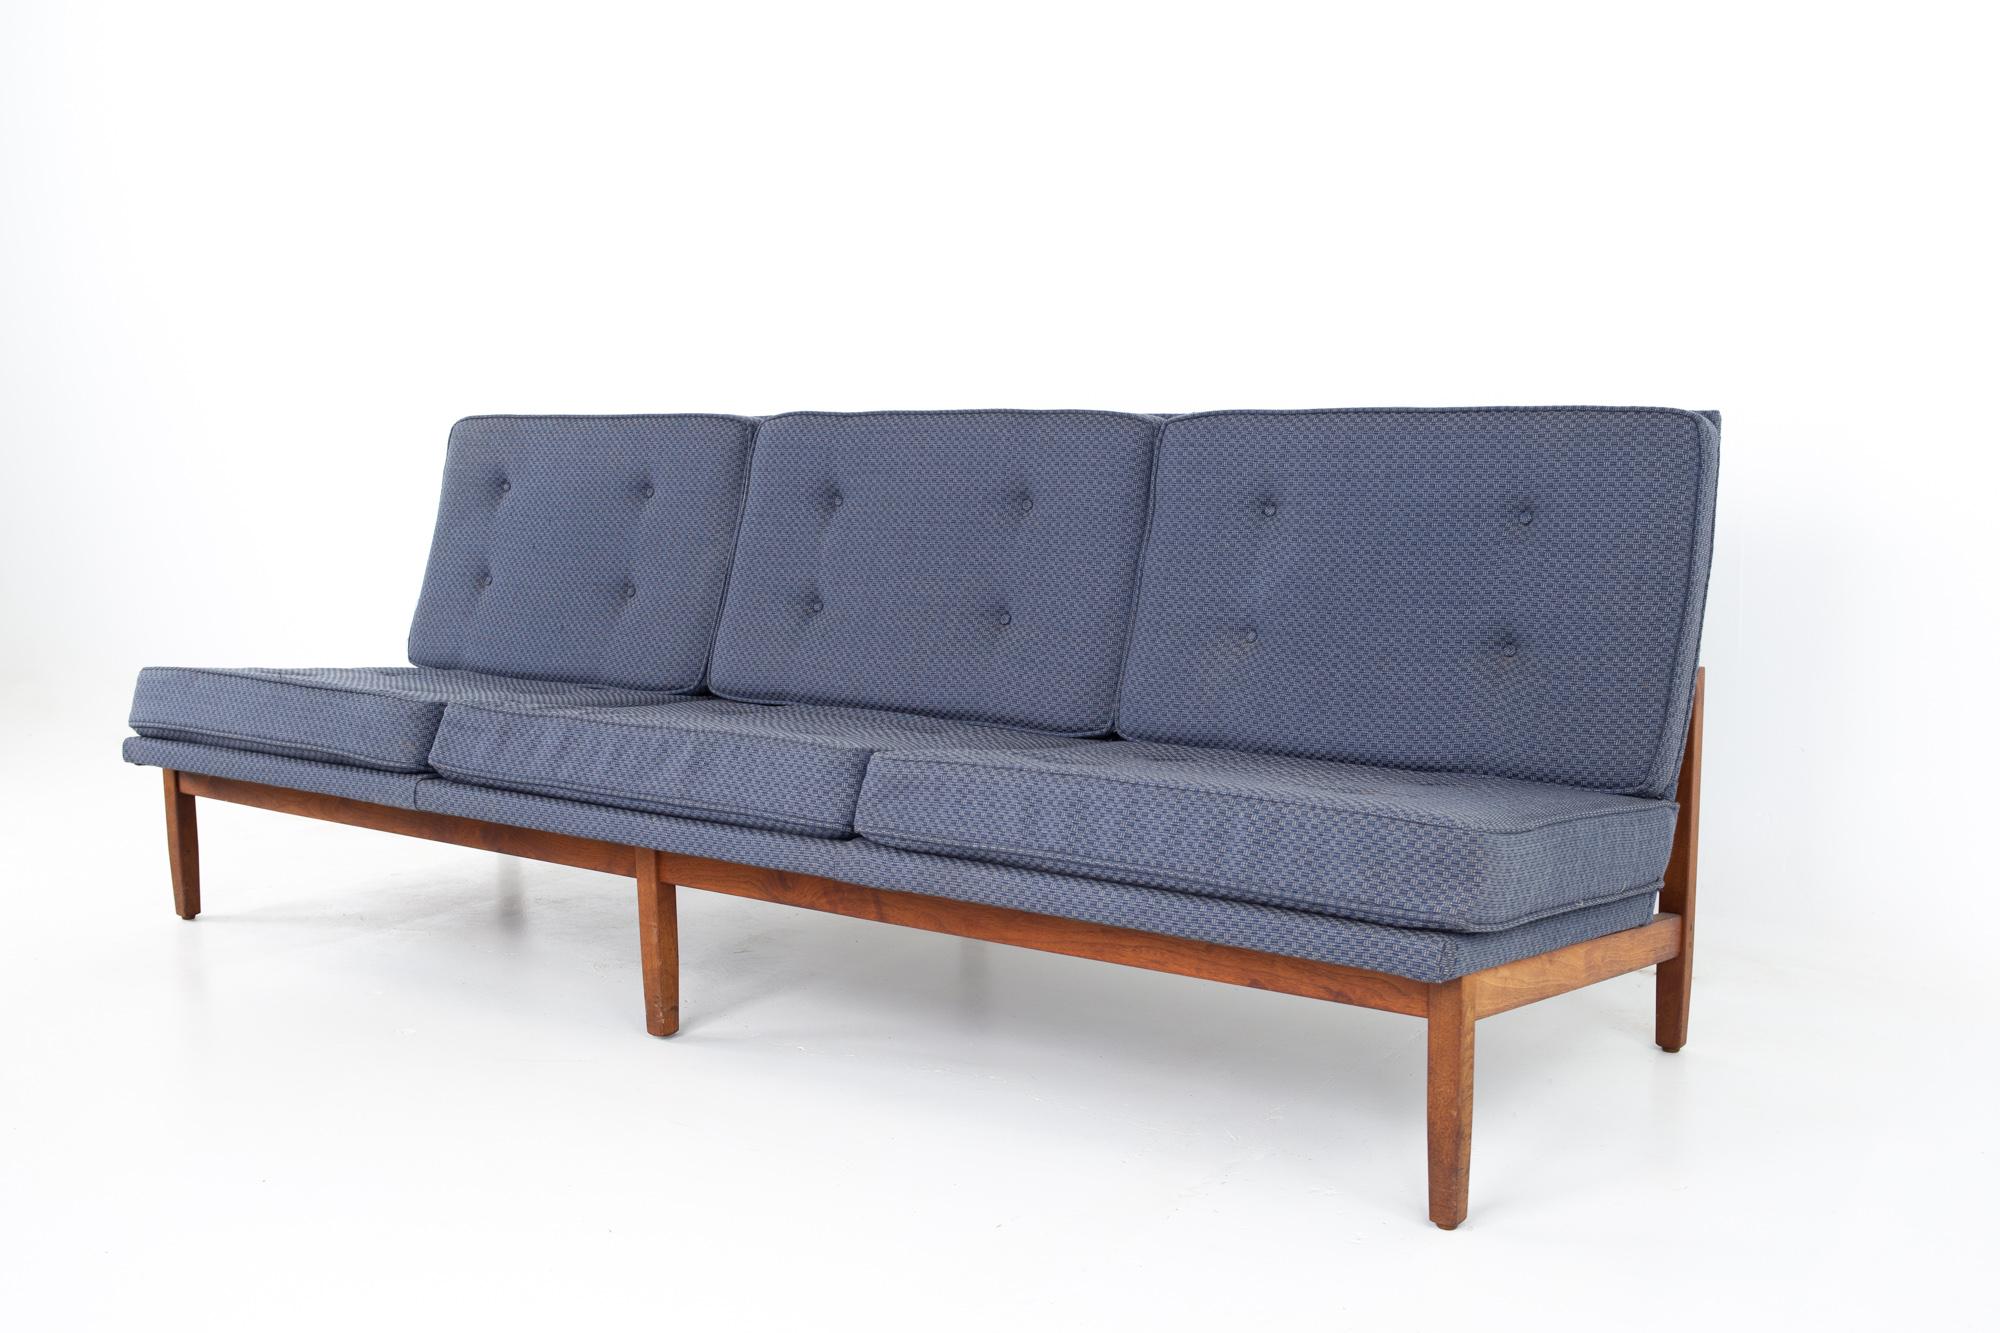 Early Florence Knoll Mid Century daybed slipper sofa
Sofa measures: 84.75 wide x 29.5 deep x 30.25 high, with a seat height of 15.5 inches 

All pieces of furniture can be had in what we call restored vintage condition. That means the piece is